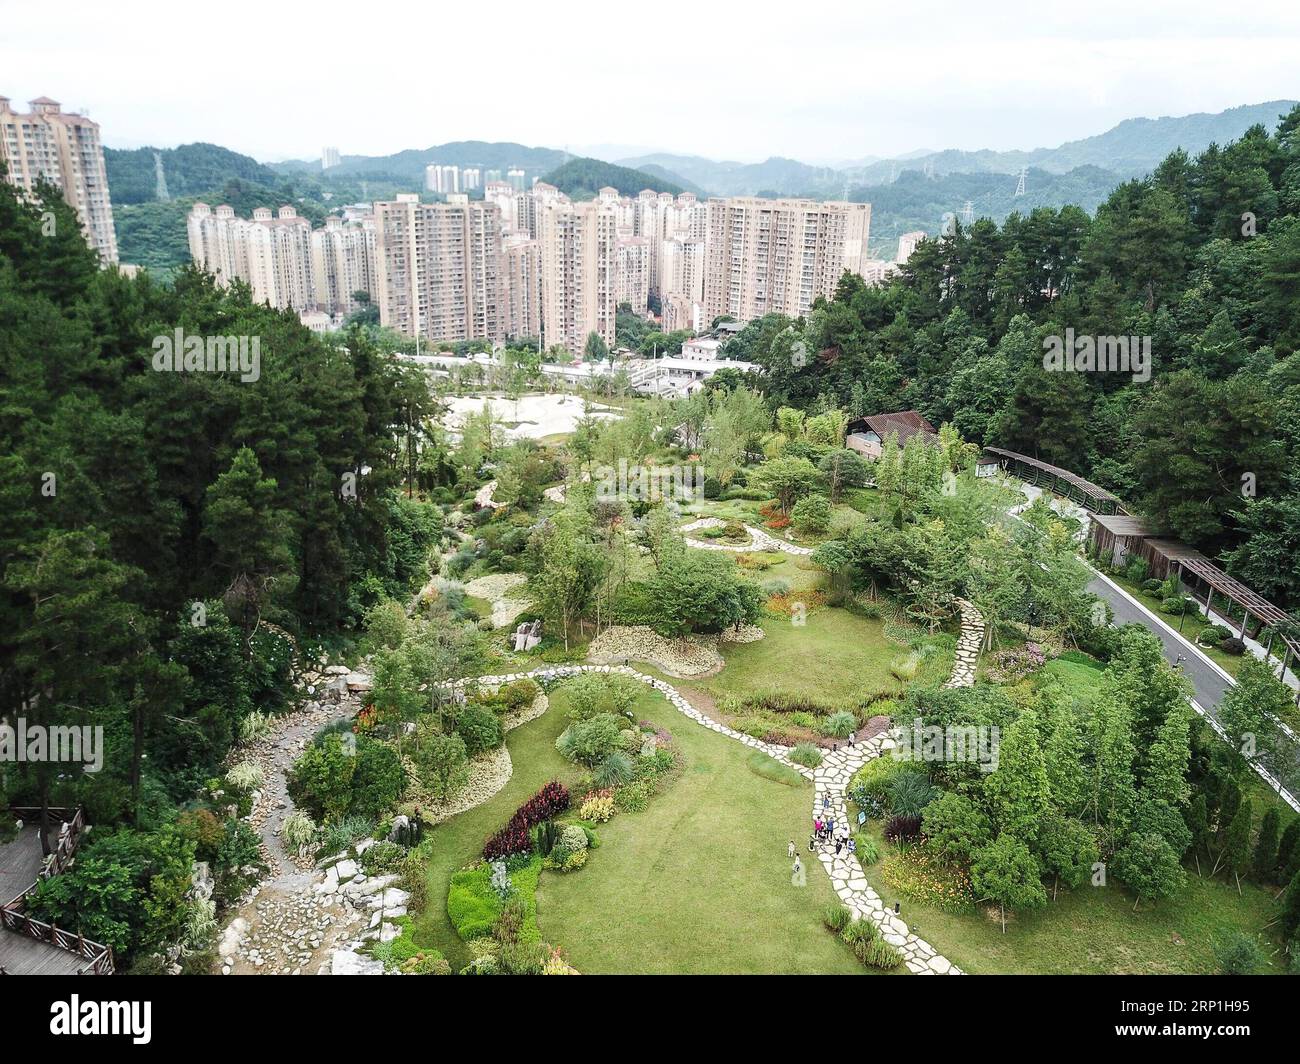 (180707) -- GUIYANG, July 7, 2018 -- People visit the Denggaoyunshan Forest Park in Guiyang, capital of southwest China s Guizhou Province, July 3, 2018. Guiyang has been improving its city park system in recent years and aims to provide a good living environment for its residents. )(wsw) CHINA-GUIZHOU-GUIYANG-CITY PARKS (CN) Taoxliang PUBLICATIONxNOTxINxCHN Stock Photo